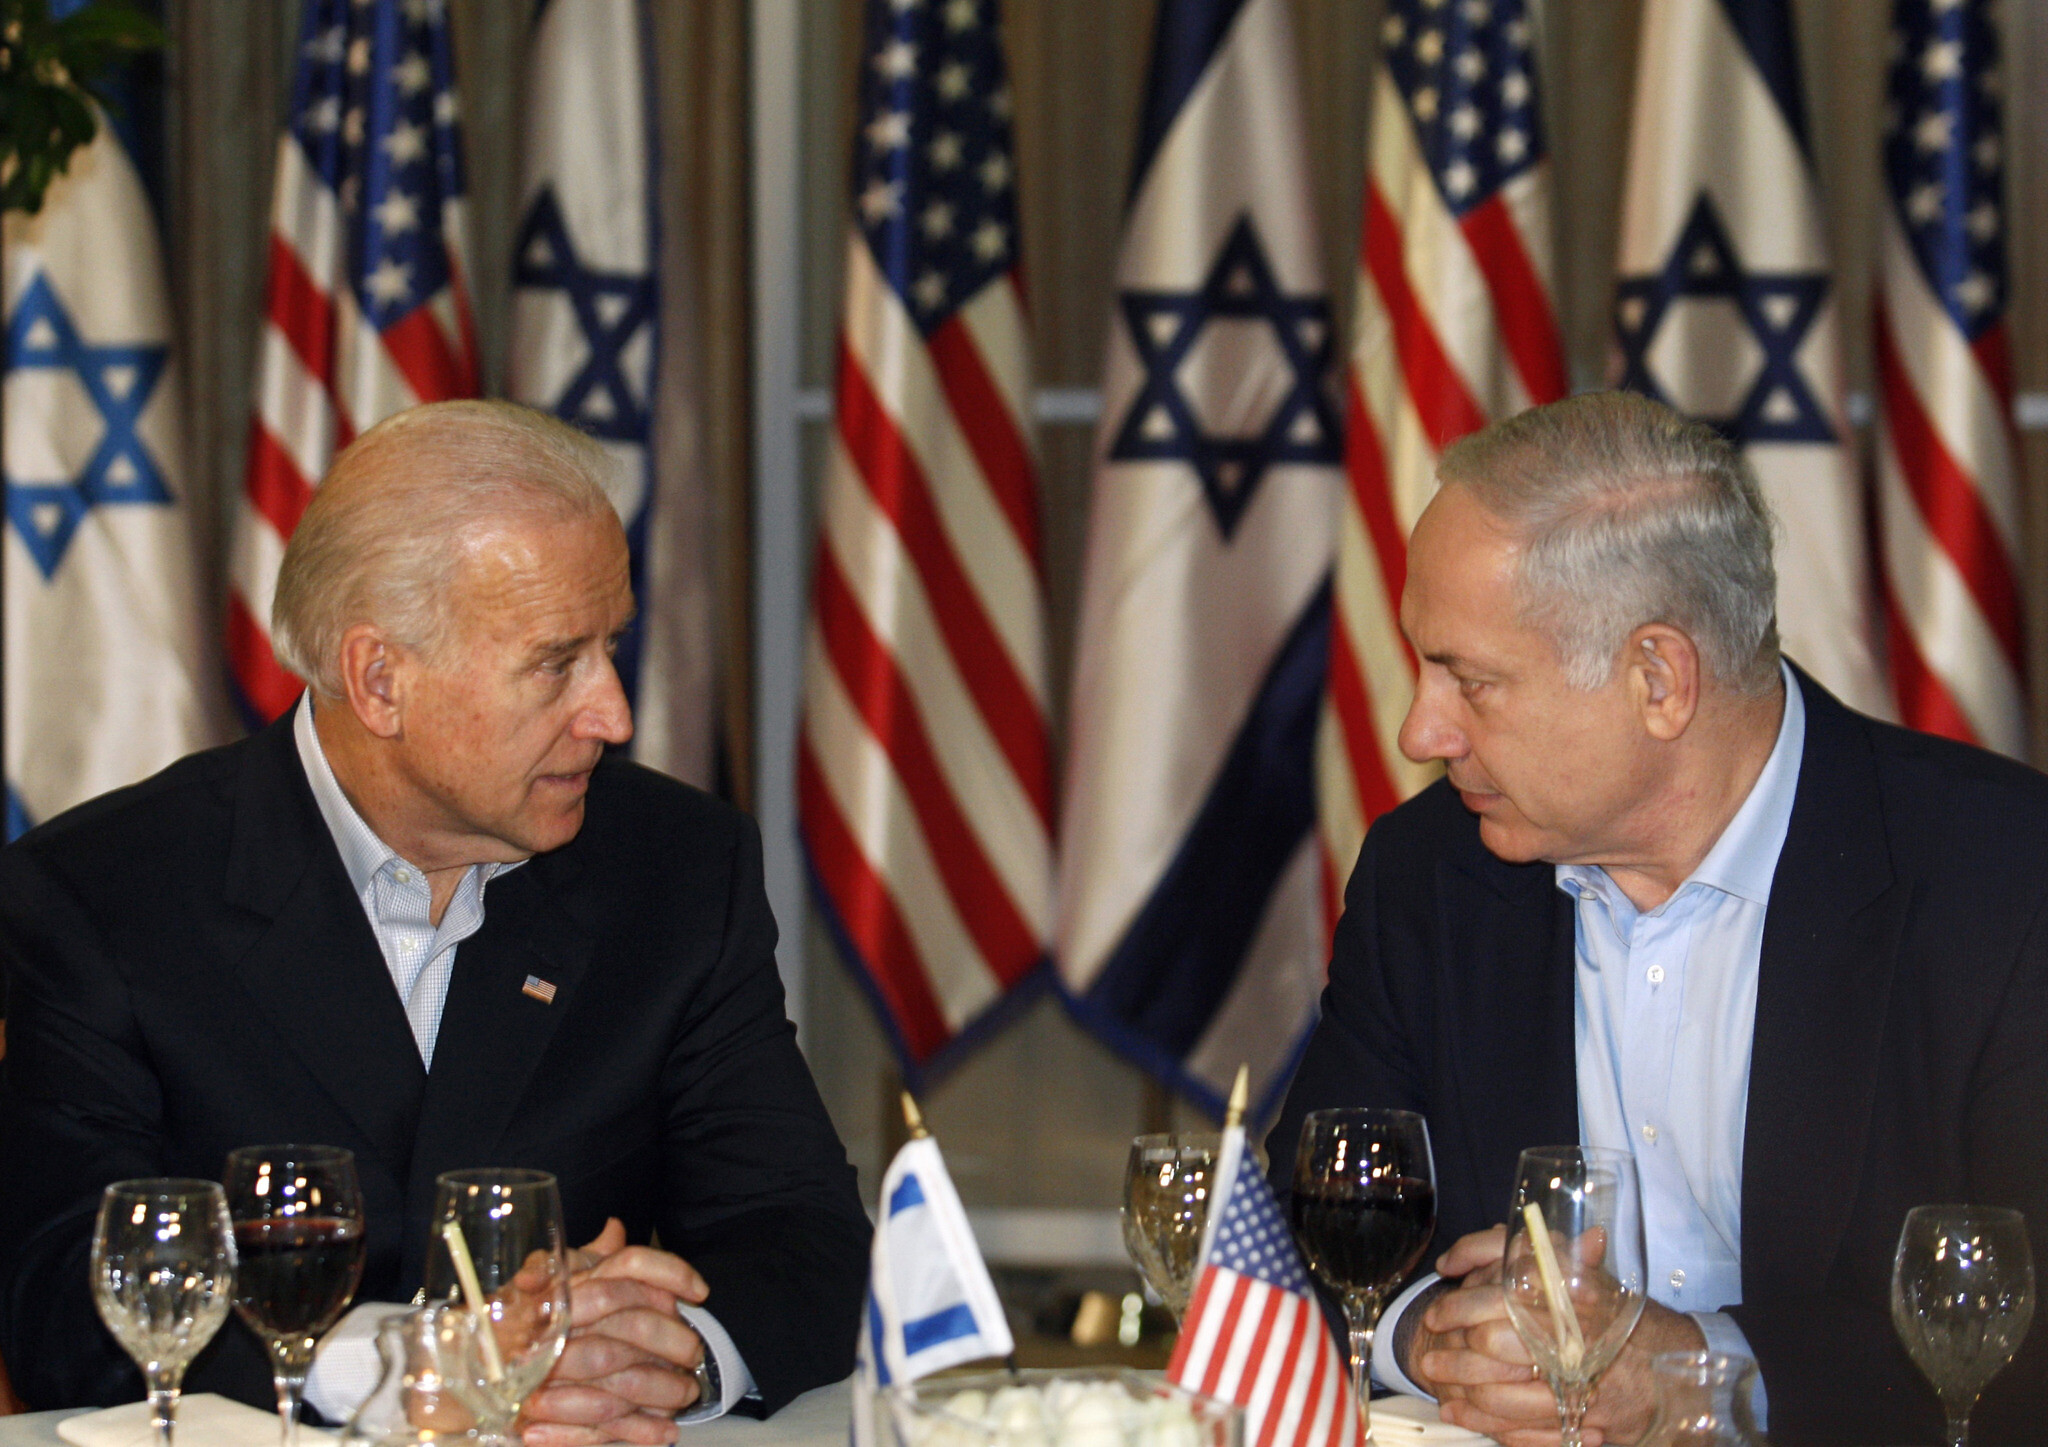 Netanyahu said to bar ministers from meeting US officials until Biden